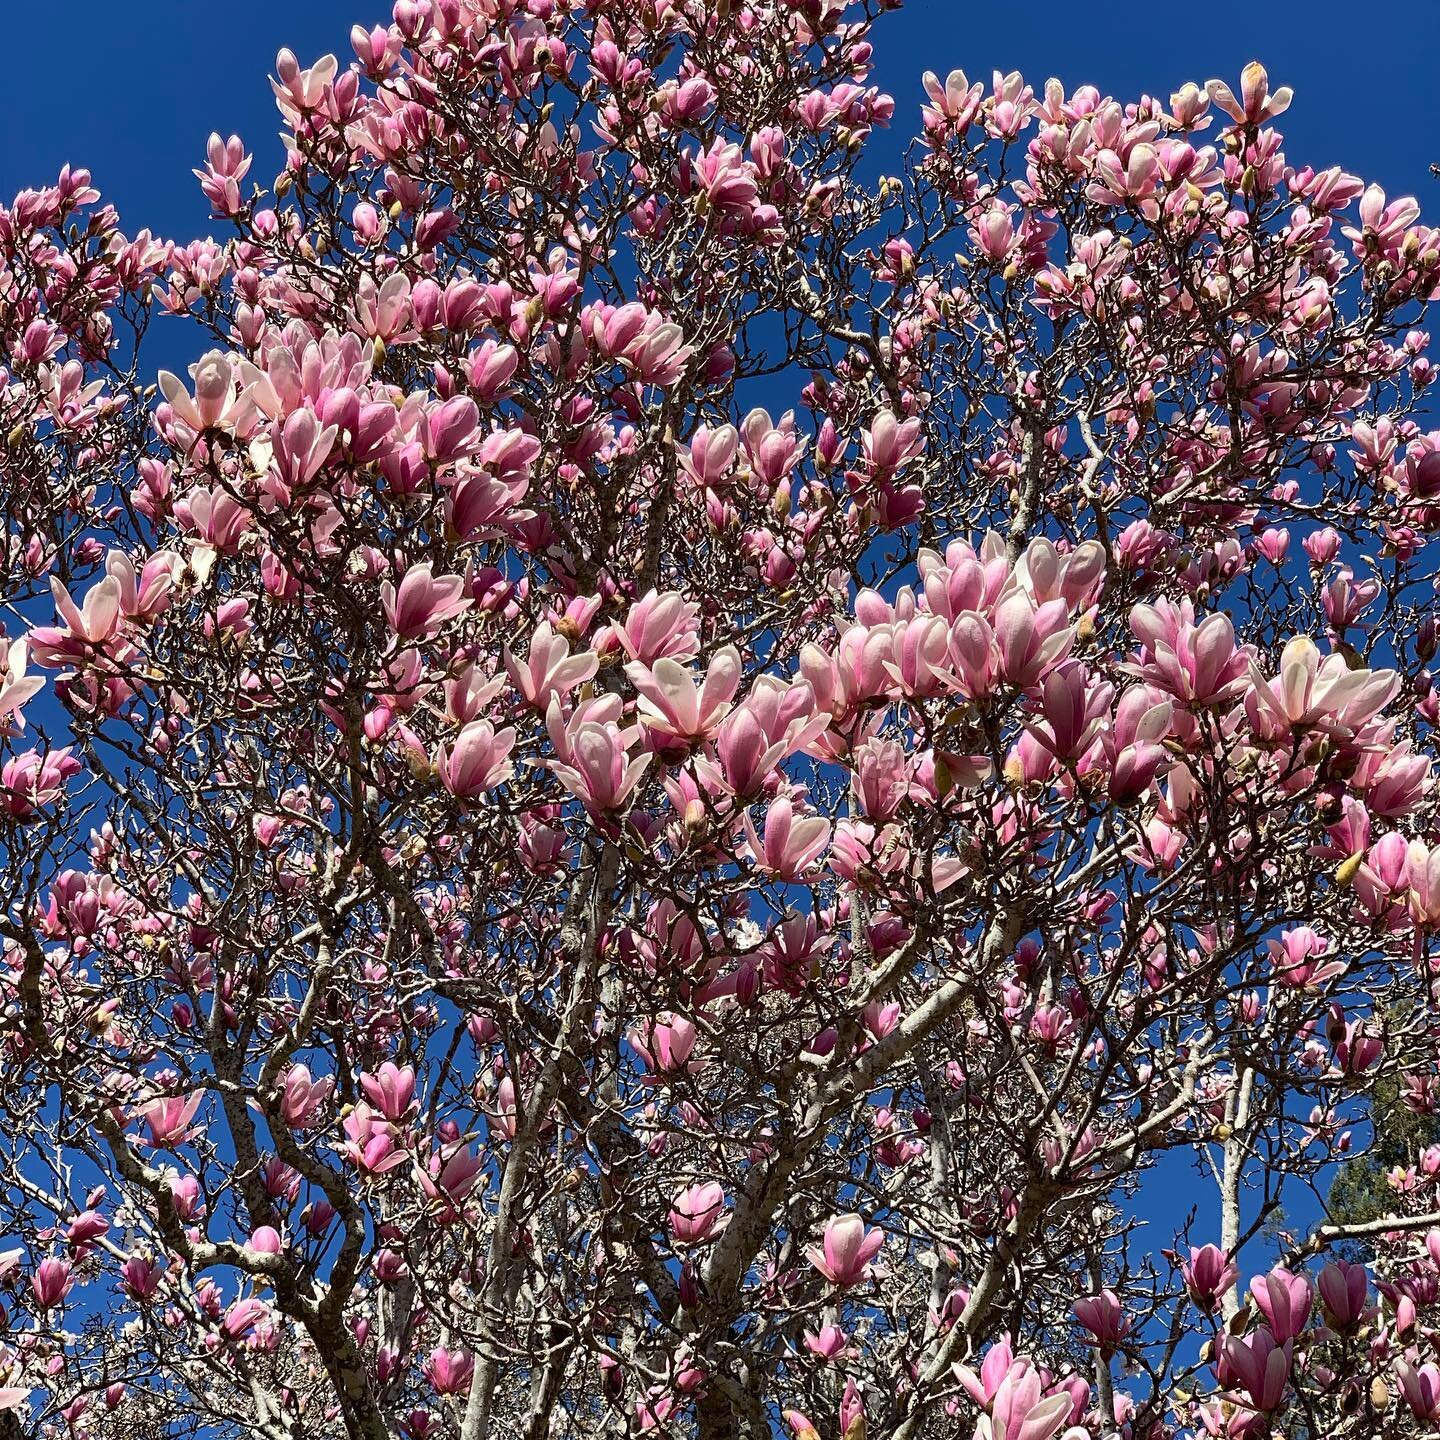 Wow - this Magnolia &ldquo;Tree Tulip&rdquo; right at our Allied Arts entry gate is blooming profusely - such an amazing emergence of Spring!

#alliedarts#menlobotanica#treetulip#springfloweringtree